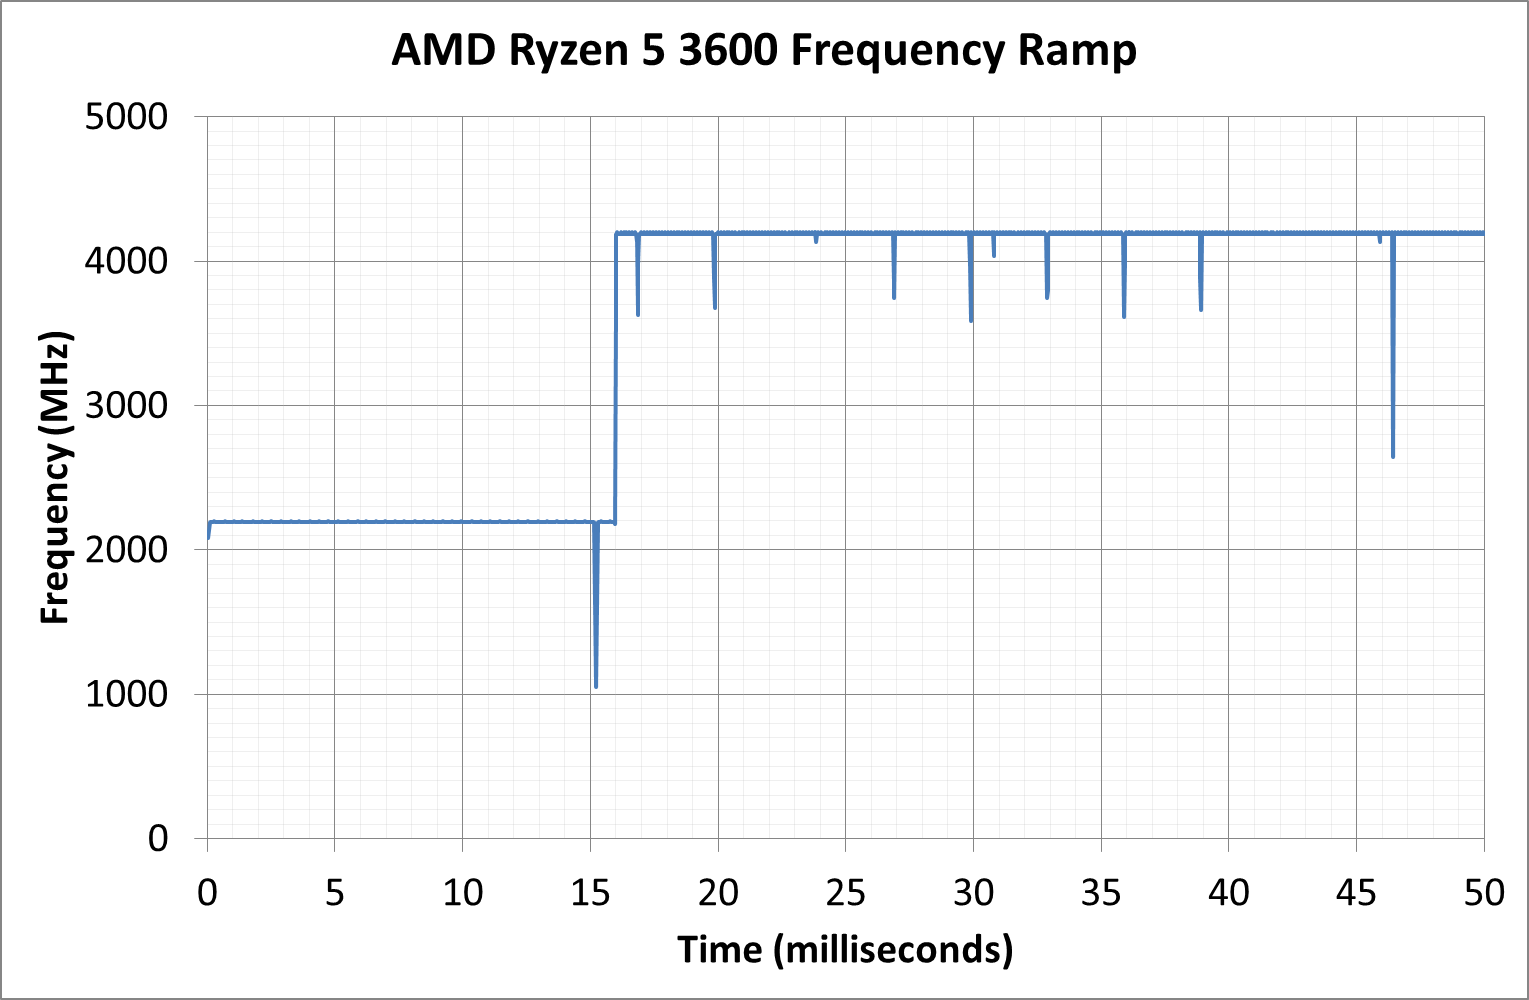 Turbo, Power, and Latency - AMD Ryzen 5 3600 Review: Why Is This 